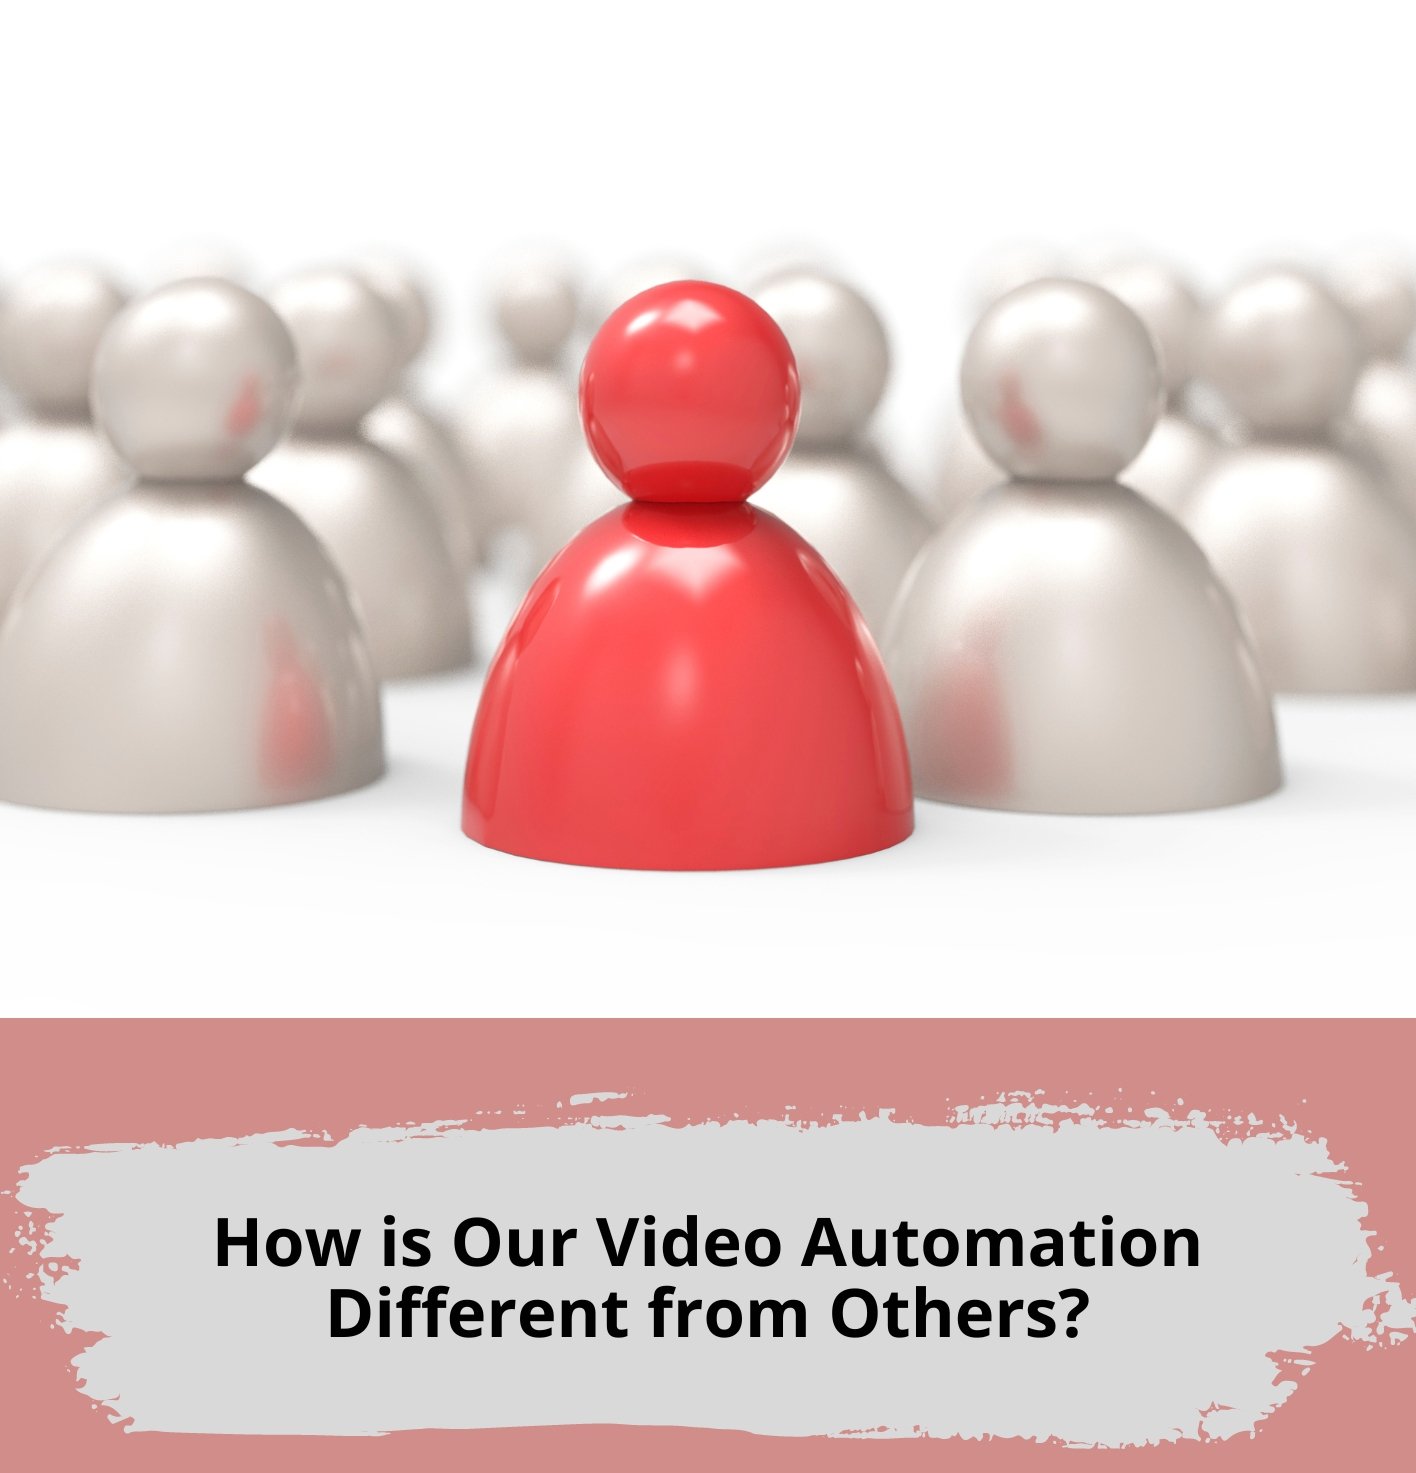 How is Our Video Automation Different from Others?